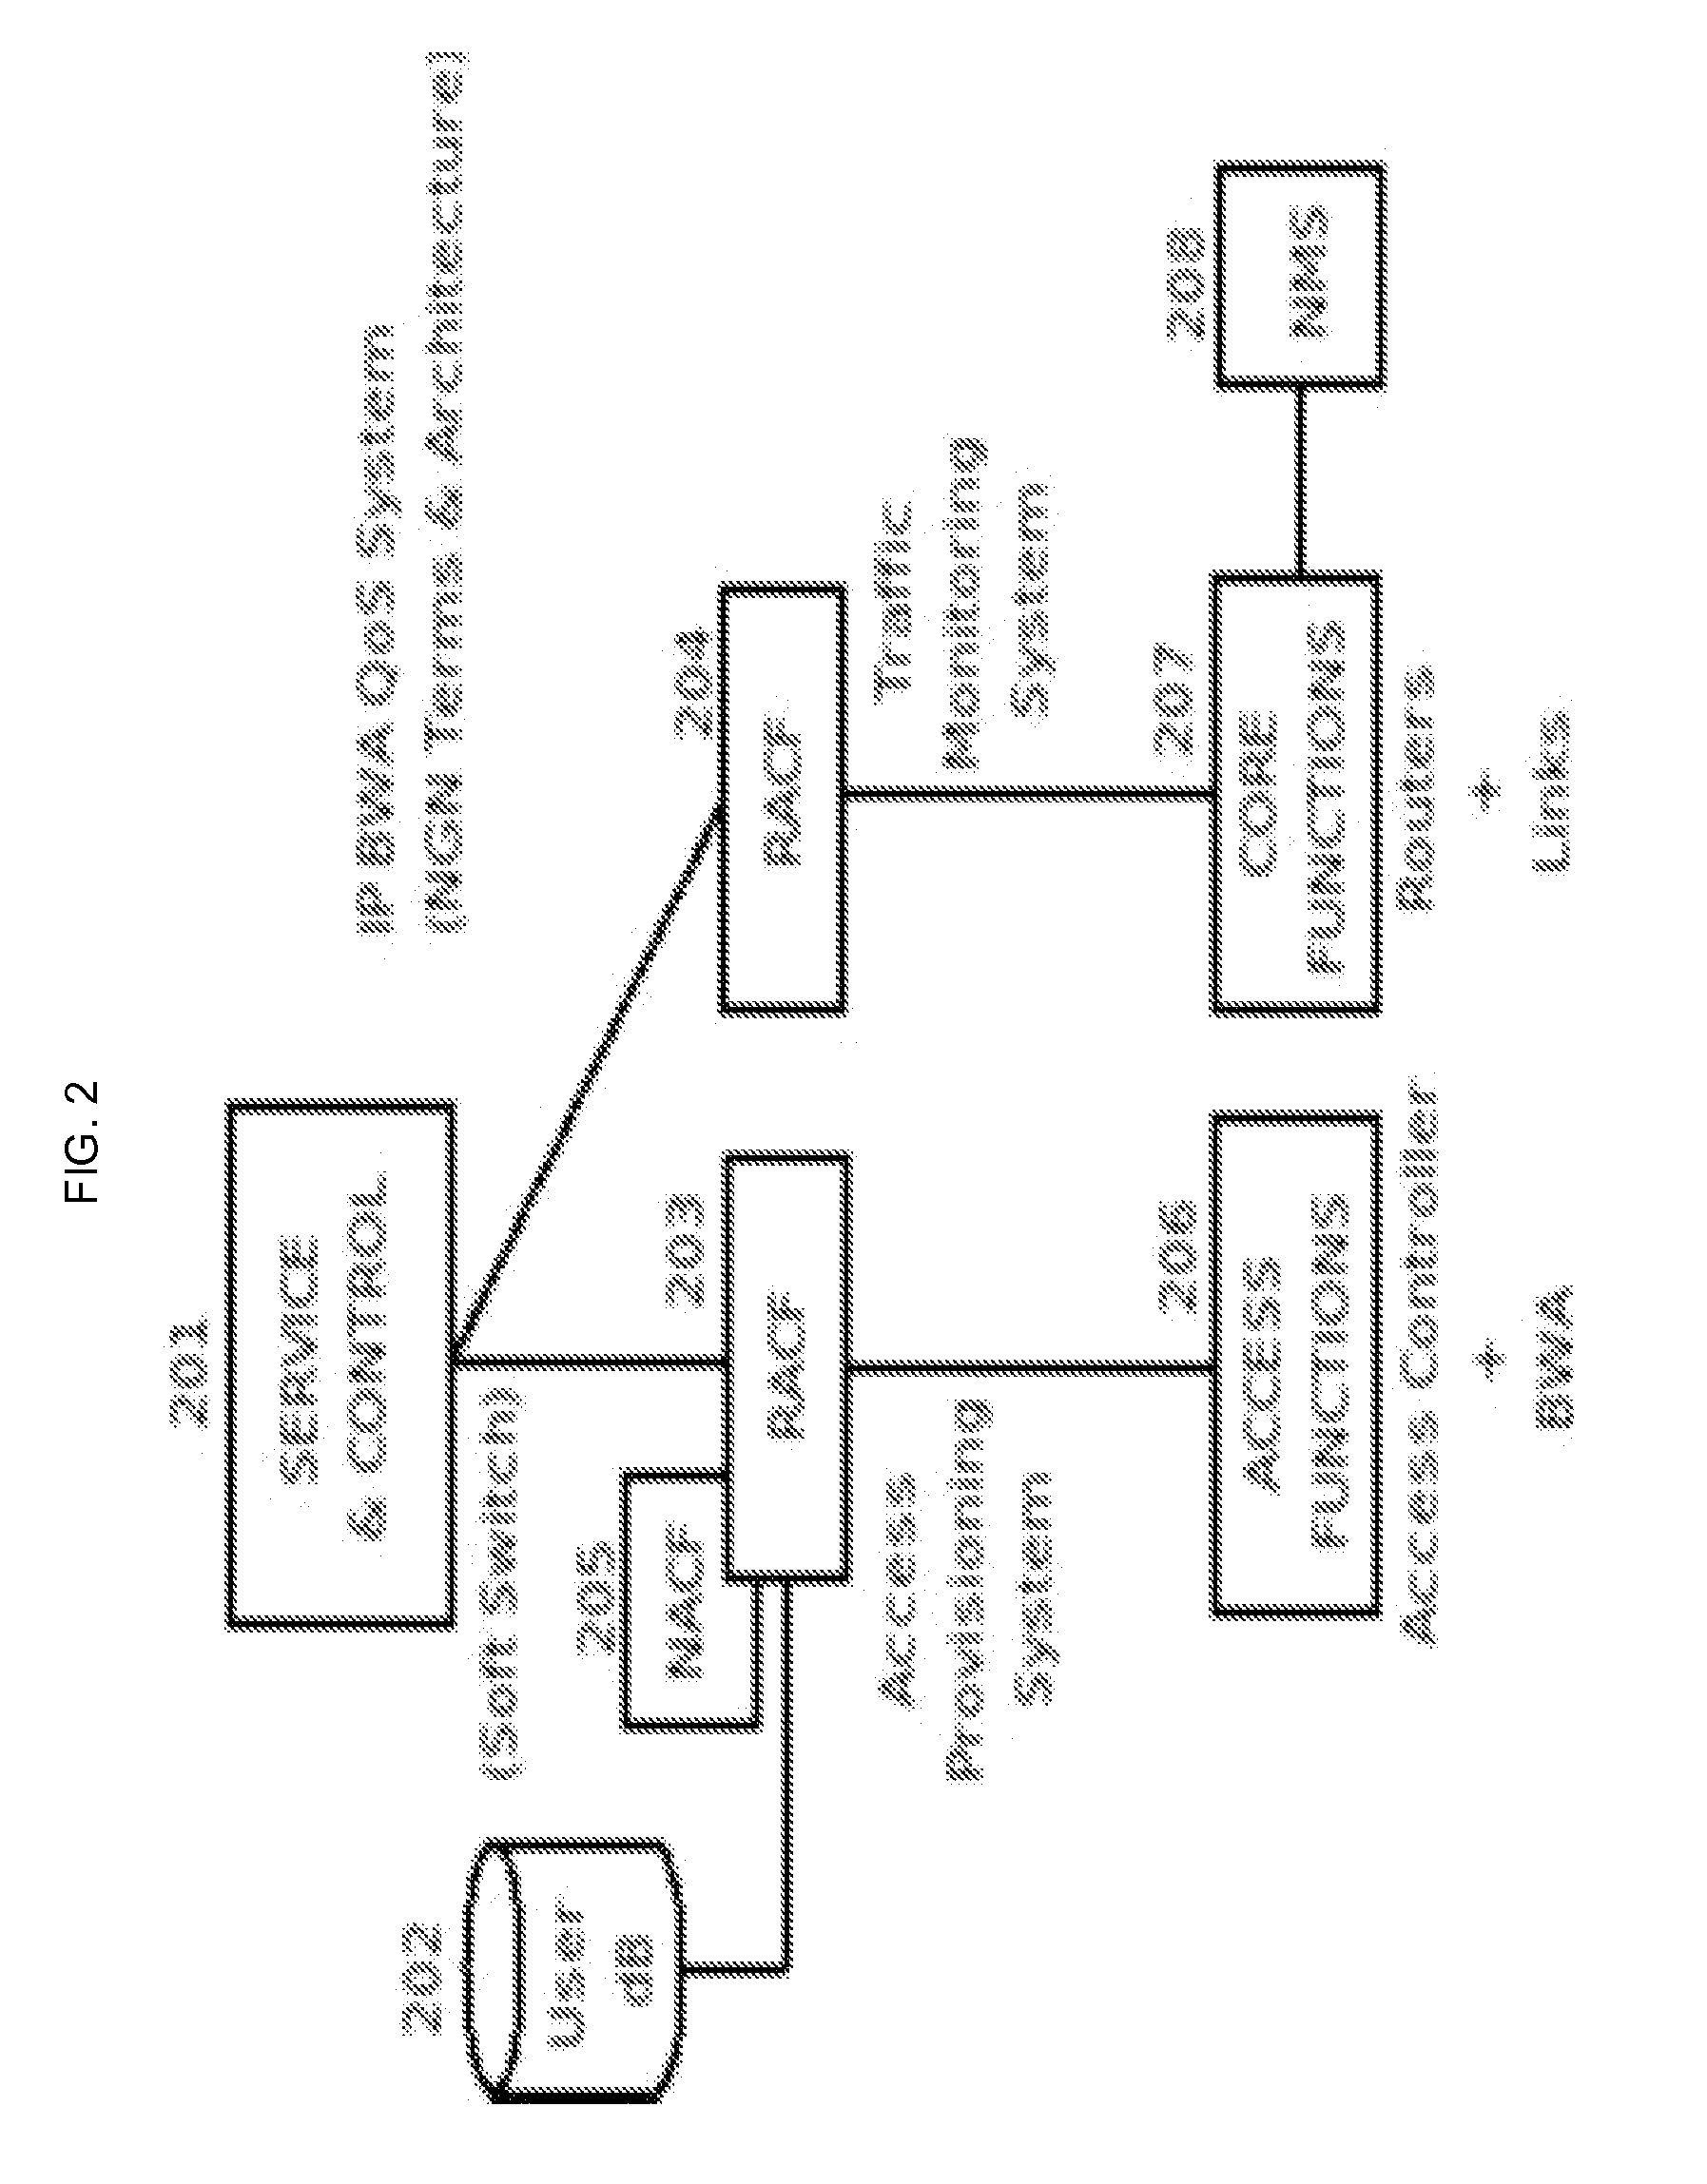 Methods and Systems for Call Admission Control and Providing Quality of Service in Broadband Wireless Access Packet-Based Networks